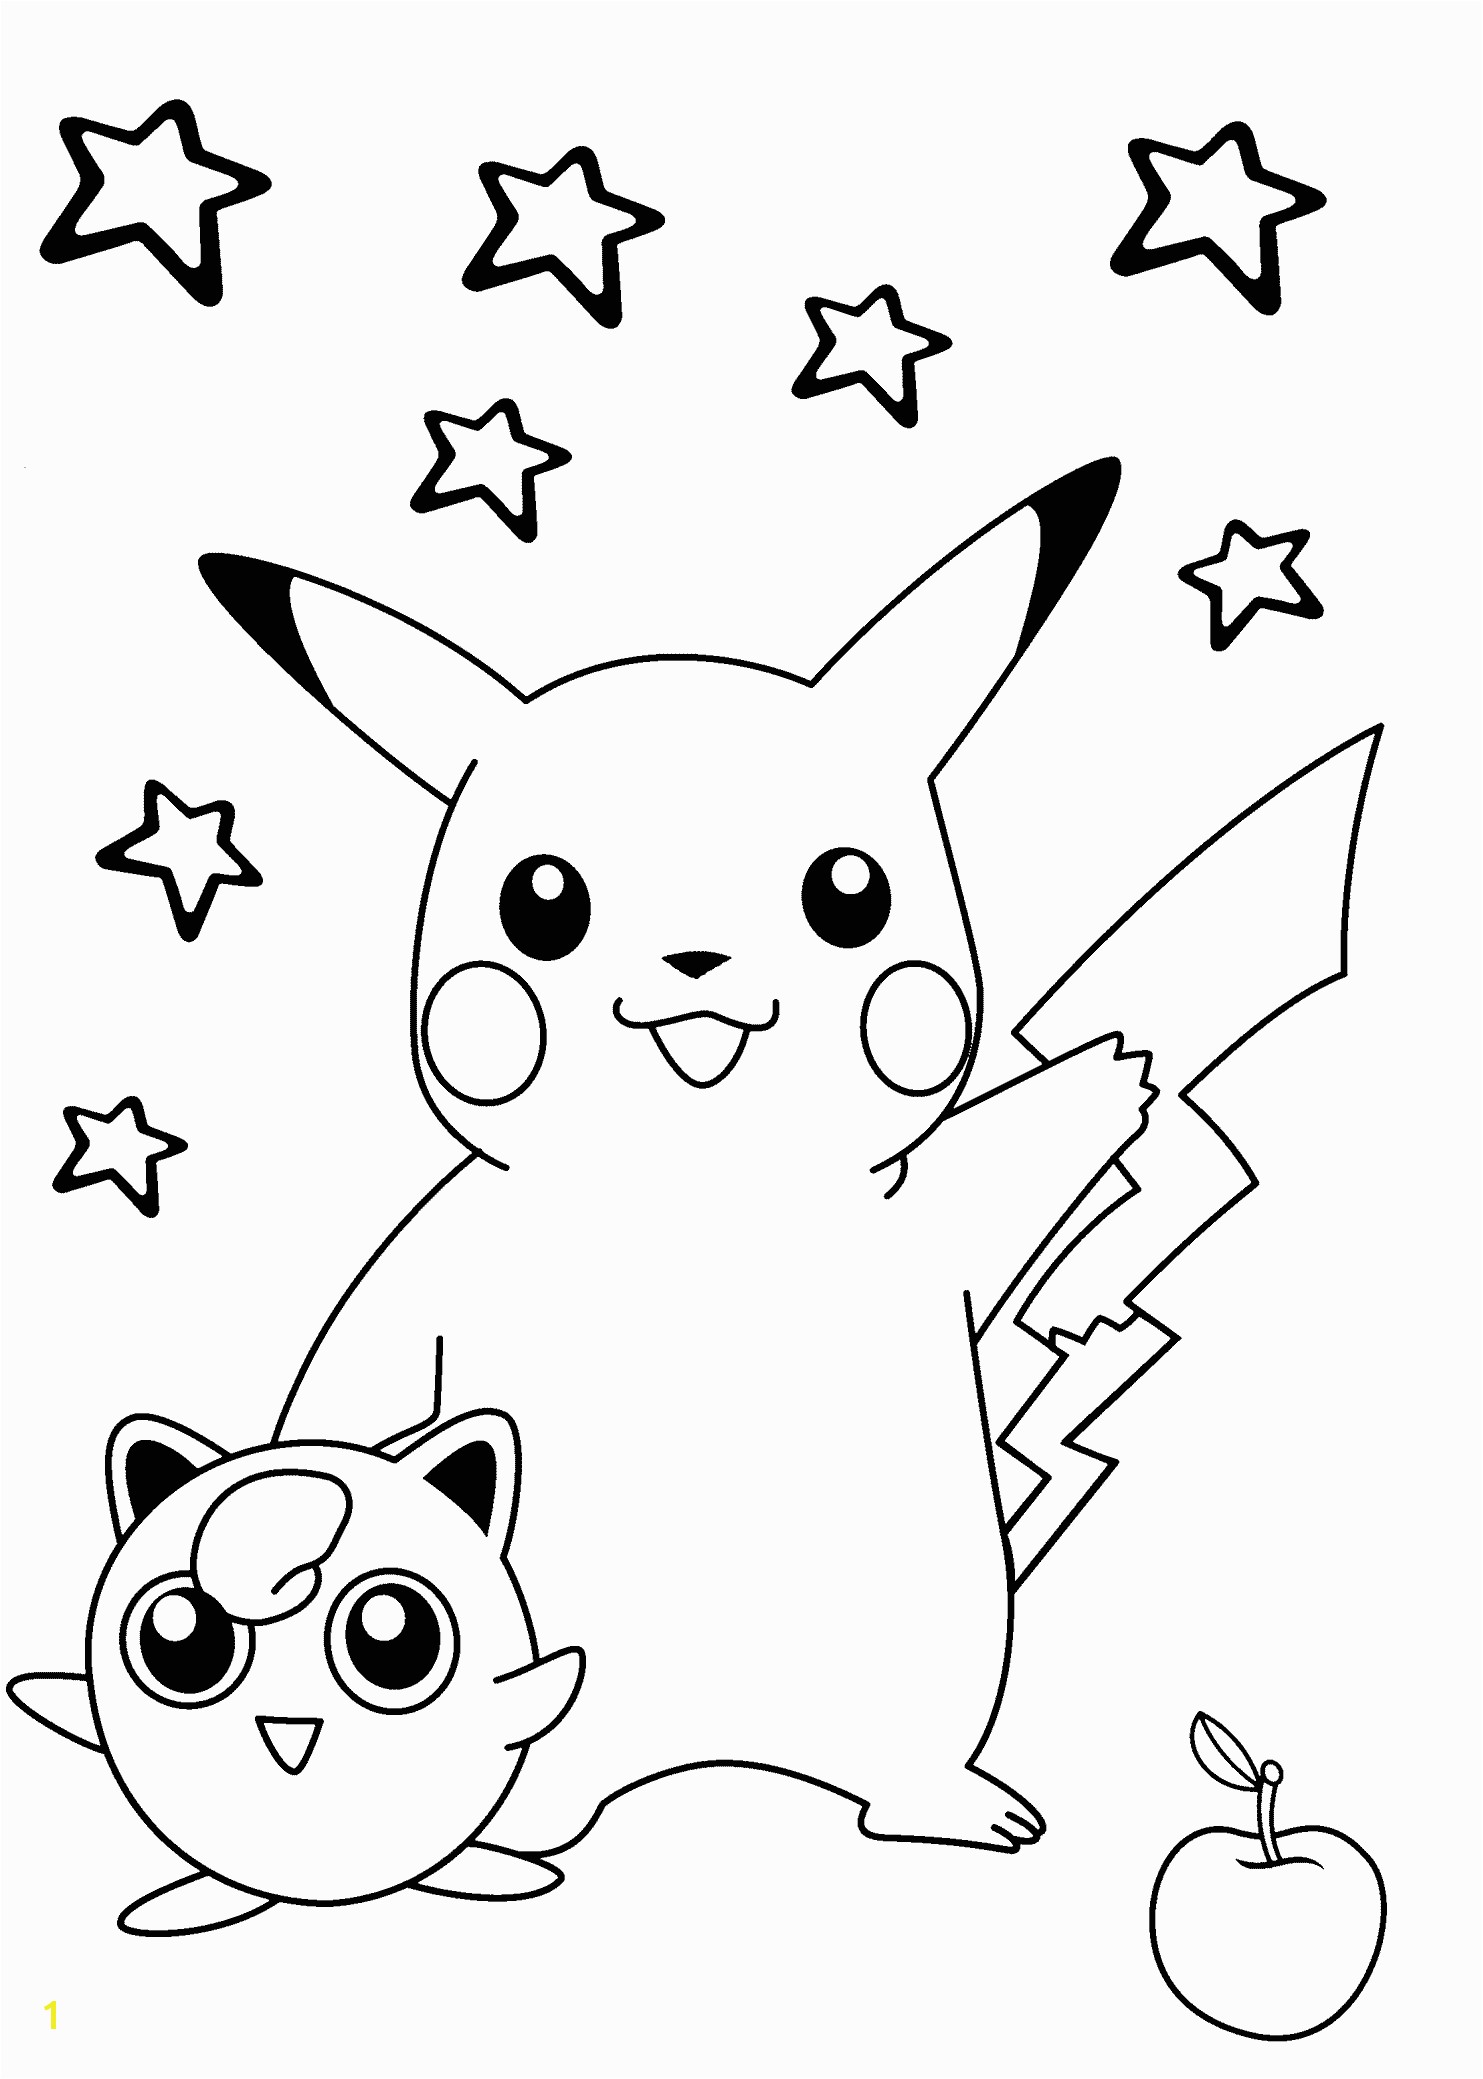 Smiling Pokemon coloring pages for kids printable free